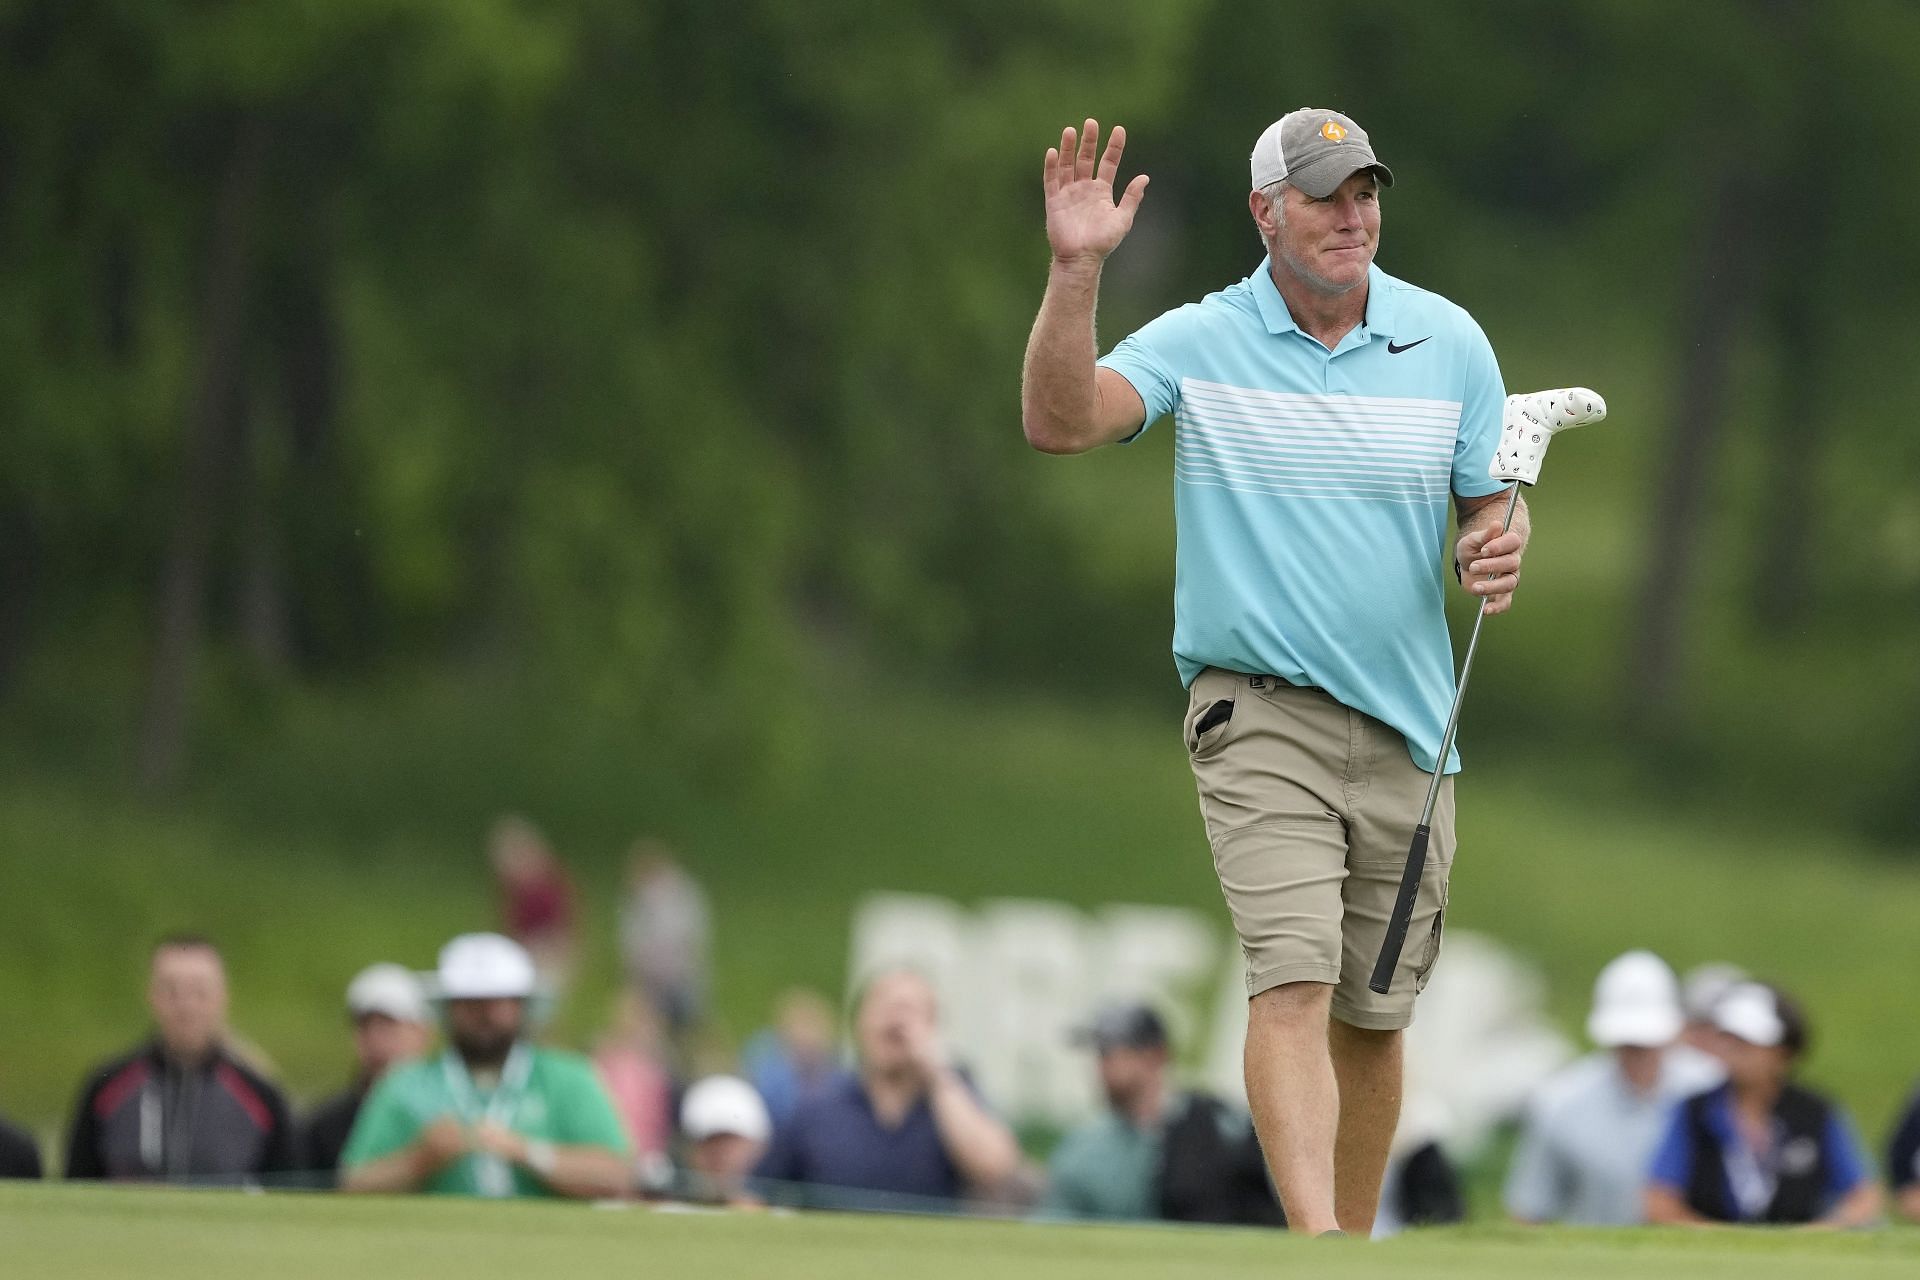 Brett Favre is in a legal battle with Pat McAfee